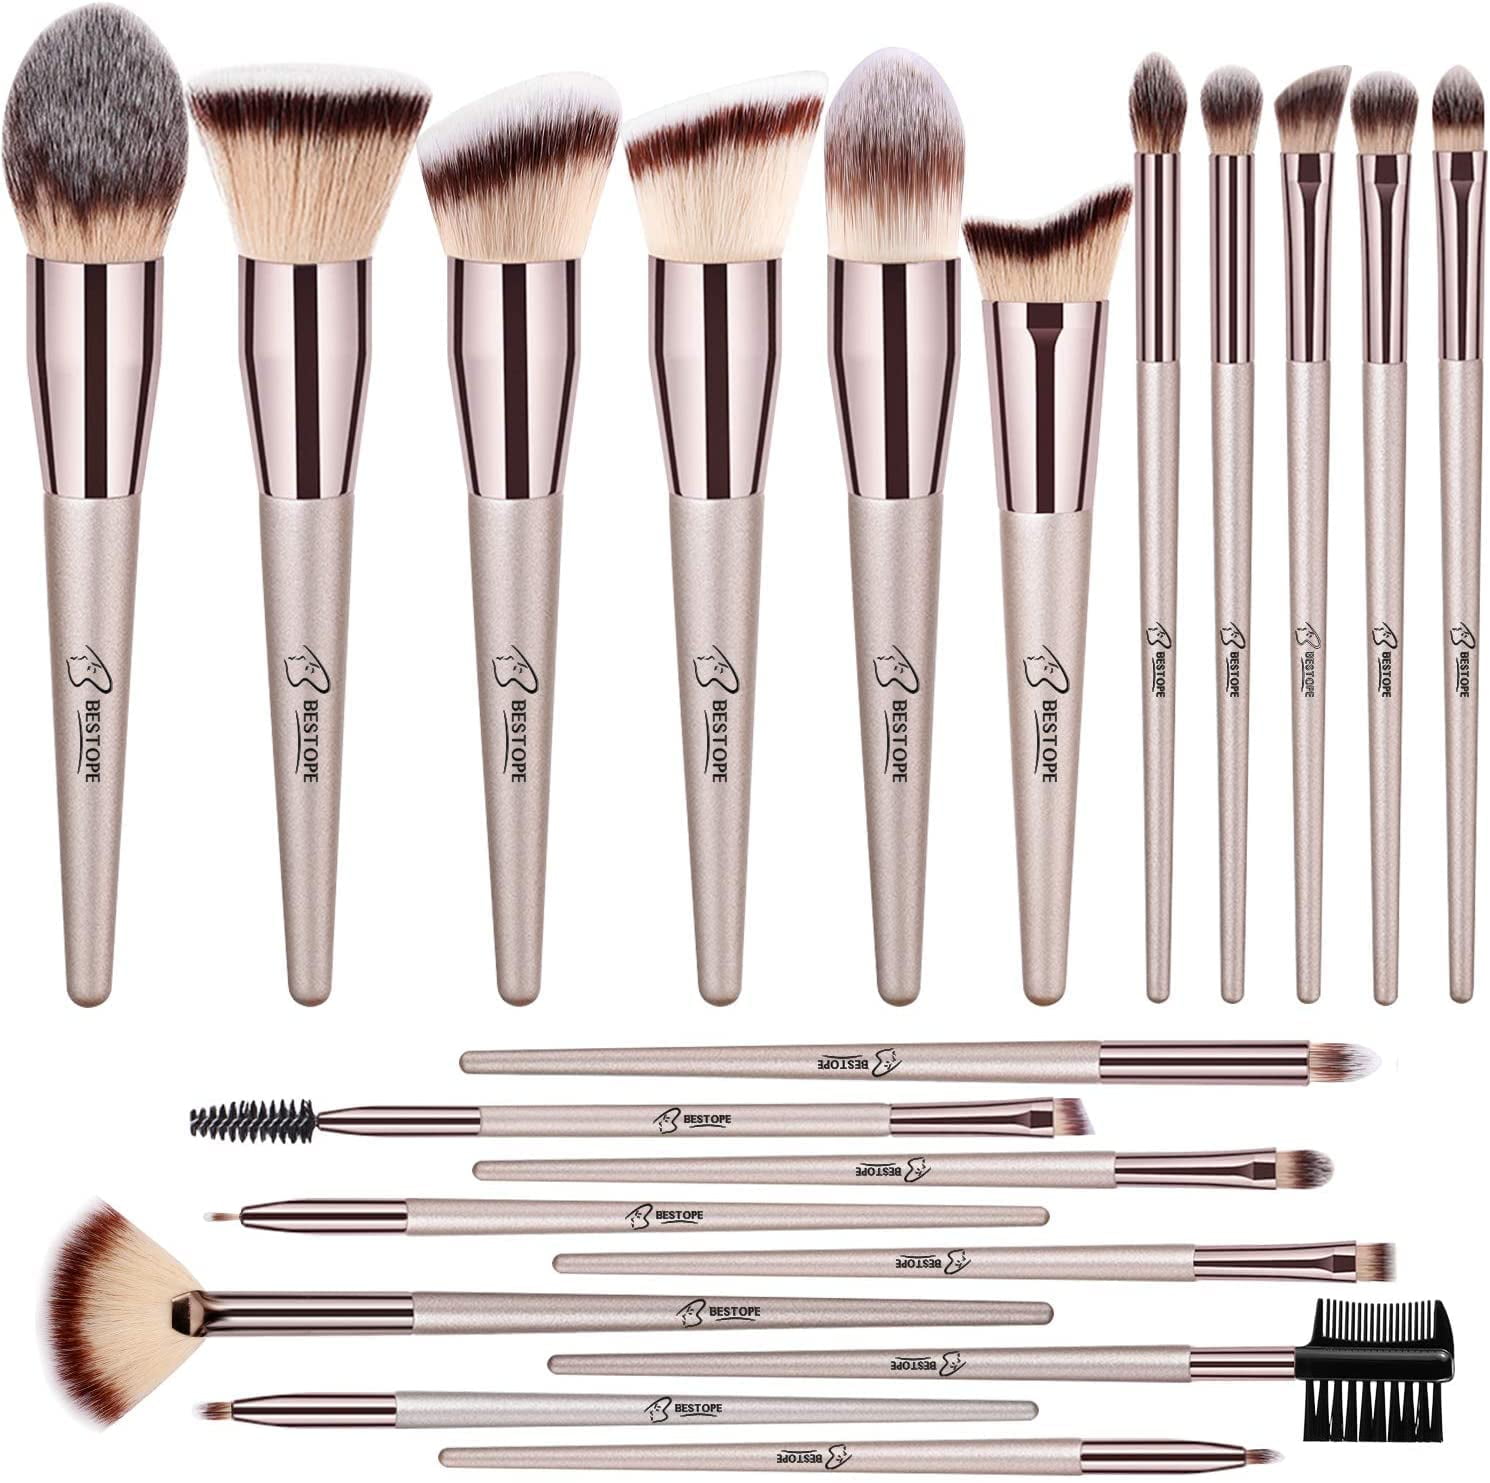 InnoGear Makeup Brushes Set, Professional Cosmetic Brush Set with 16 Makeup  Brushes and Sponges and Brush Cleaner for Foundation Powder Concealers